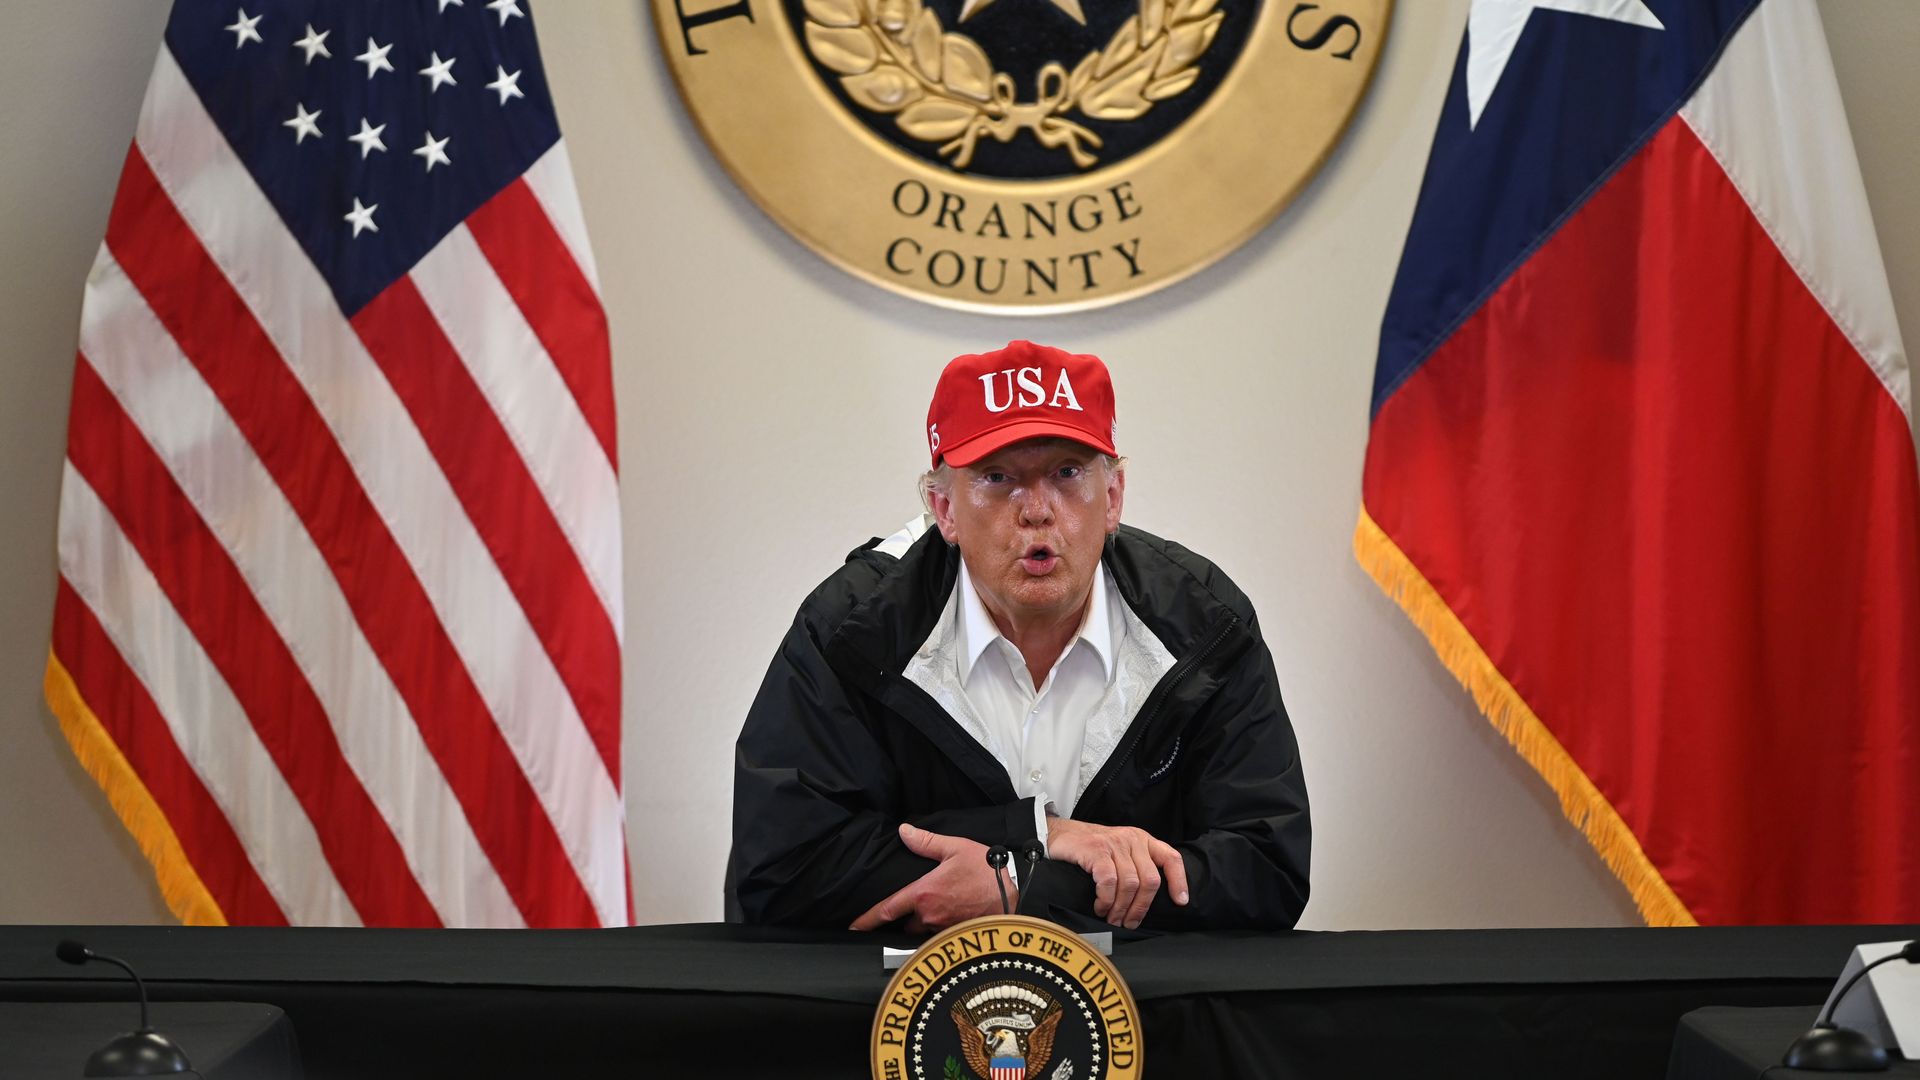 President  Trump attends a briefing at an emergency operation center in Orange, Texas, on August 29